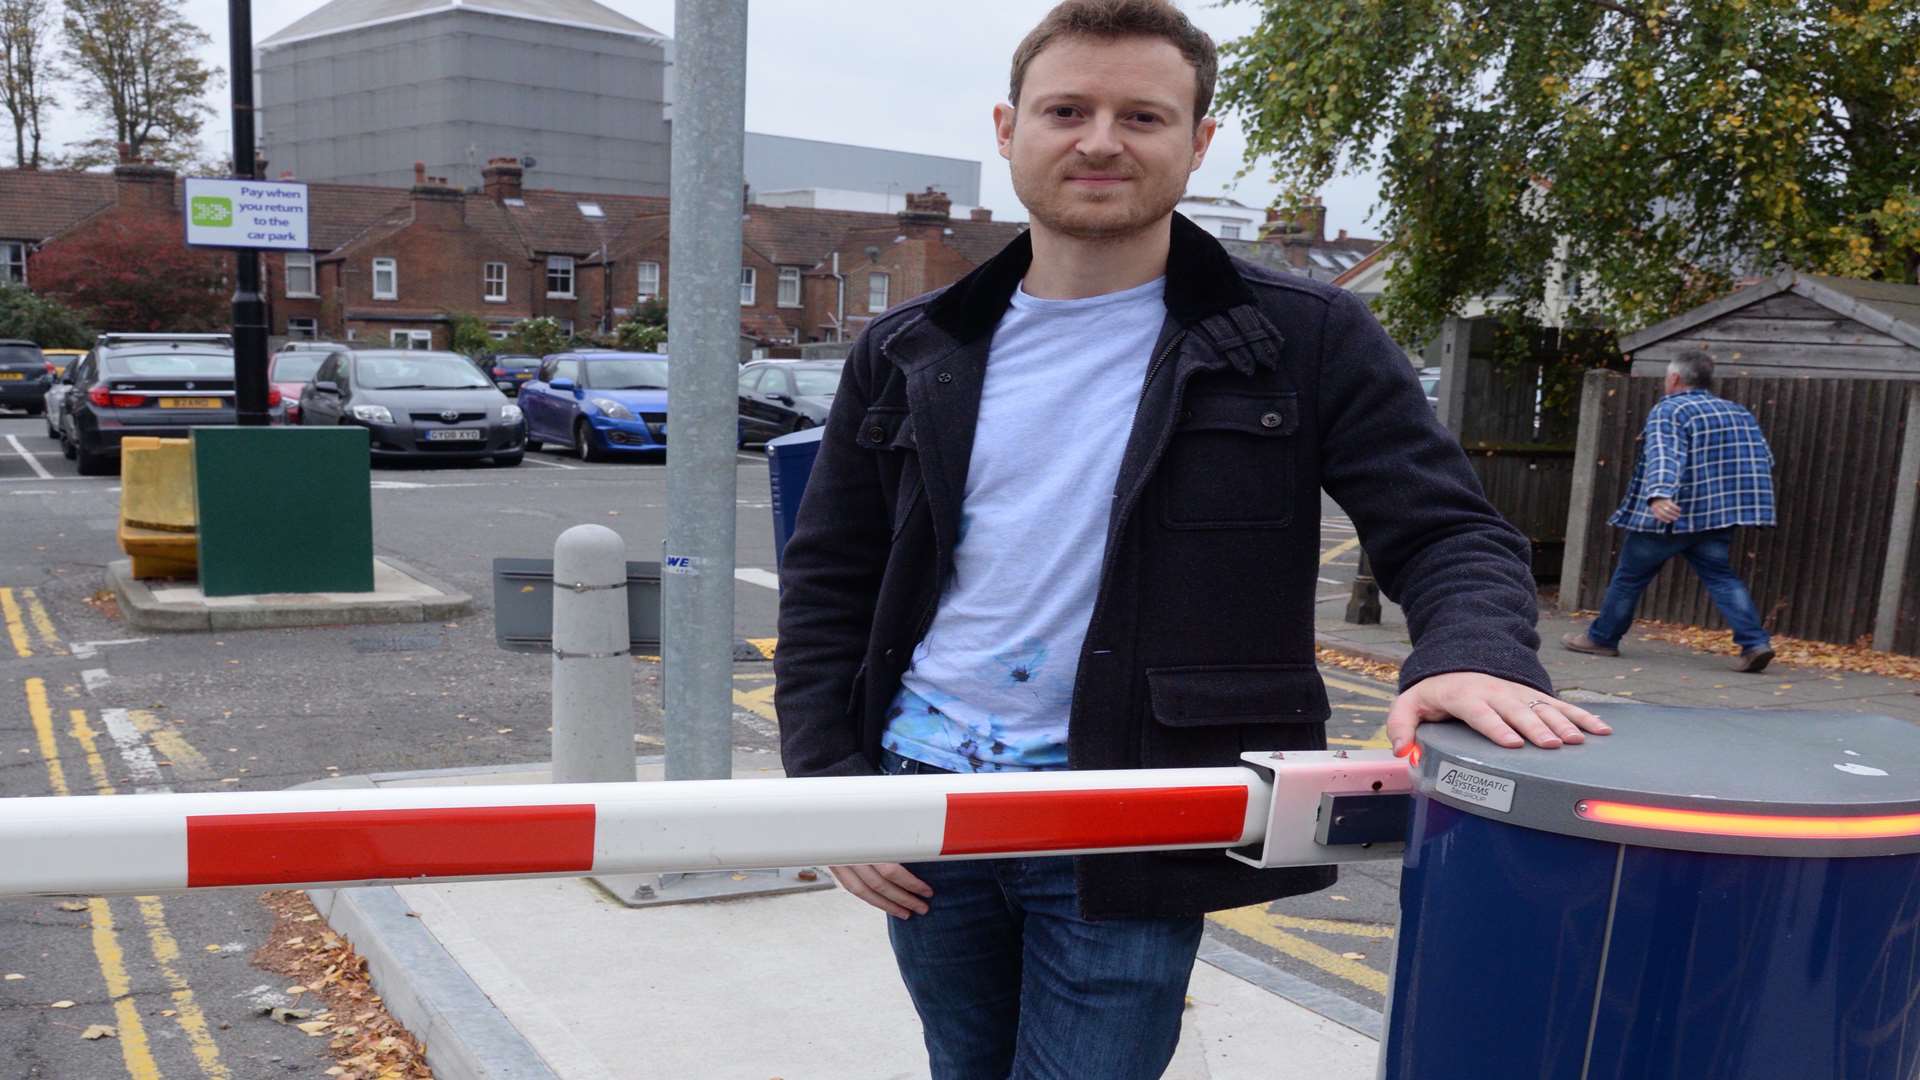 Cllr Ben-Fitter Harding and the ANPR barriers at the Pound Lane car park in Canterbury